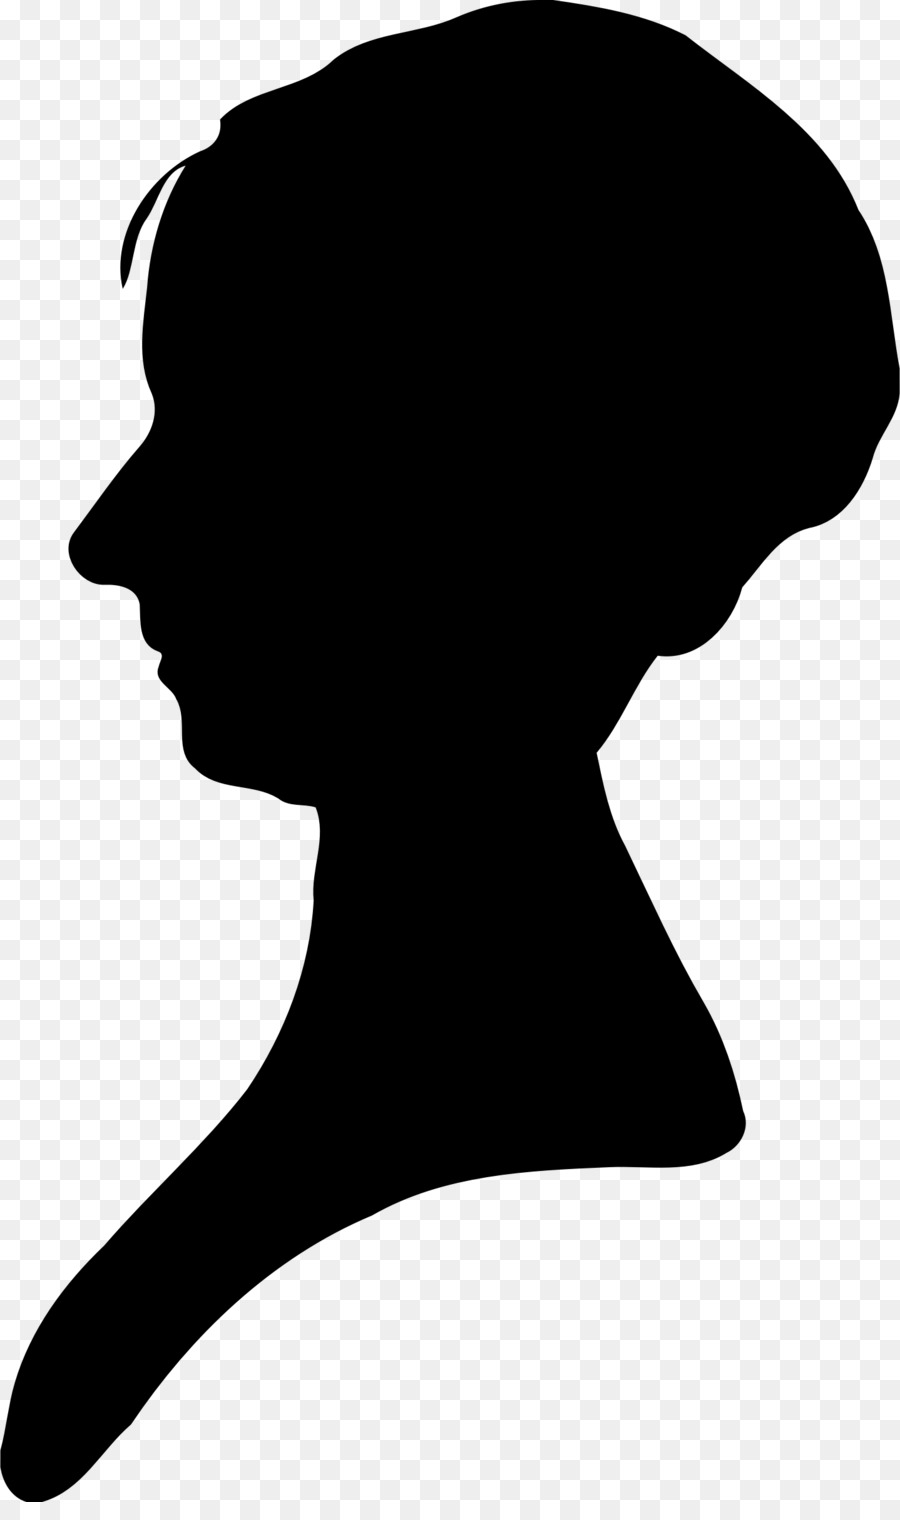 Free Woman Head Silhouette Png, Download Free Woman Head Silhouette Png